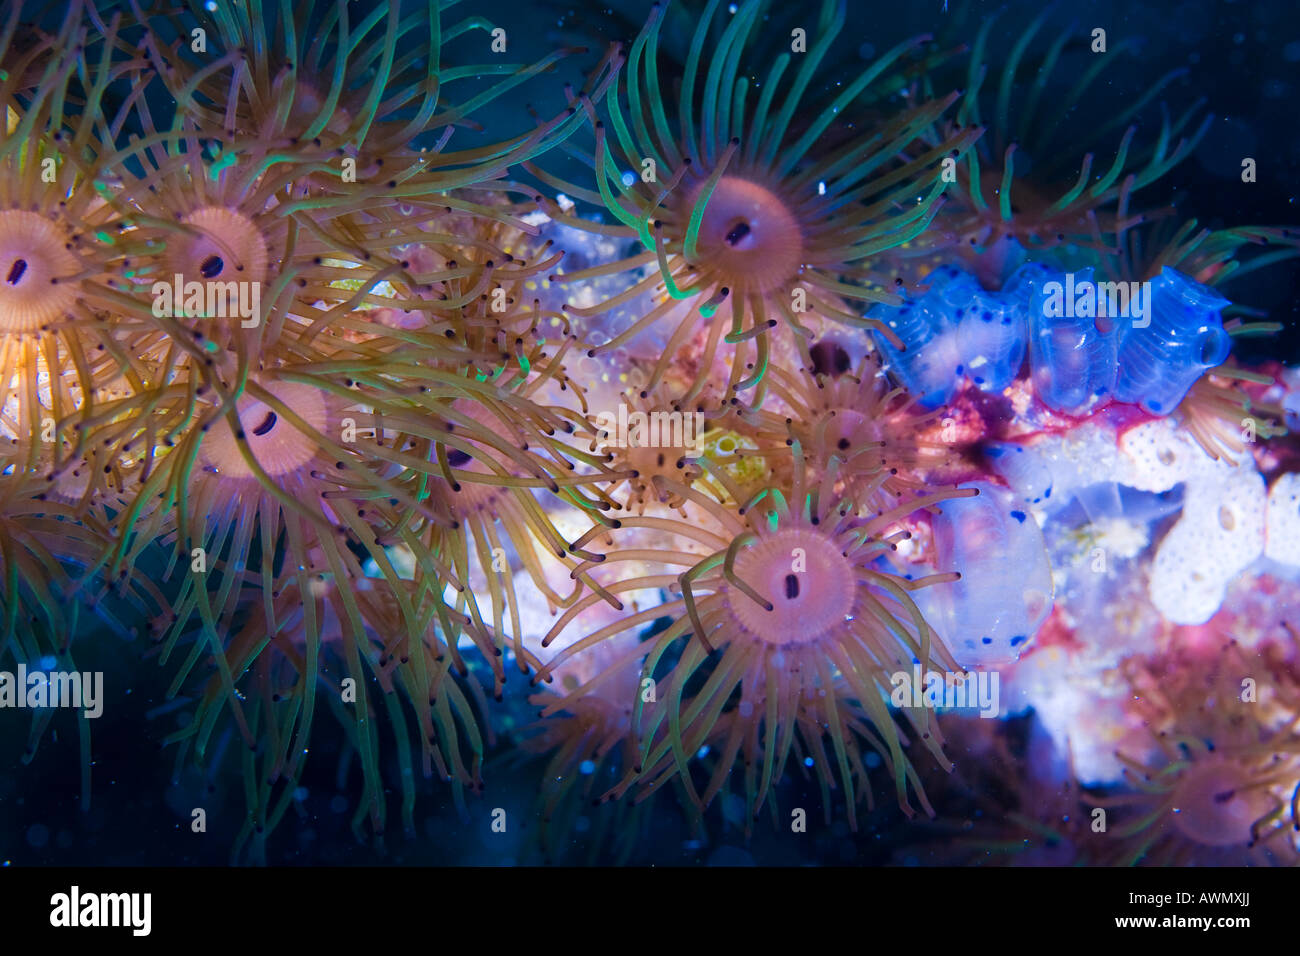 Encrusting Stick Anemones (Acrozoanthus) and Seasquirts, Indonesia, Asia Stock Photo